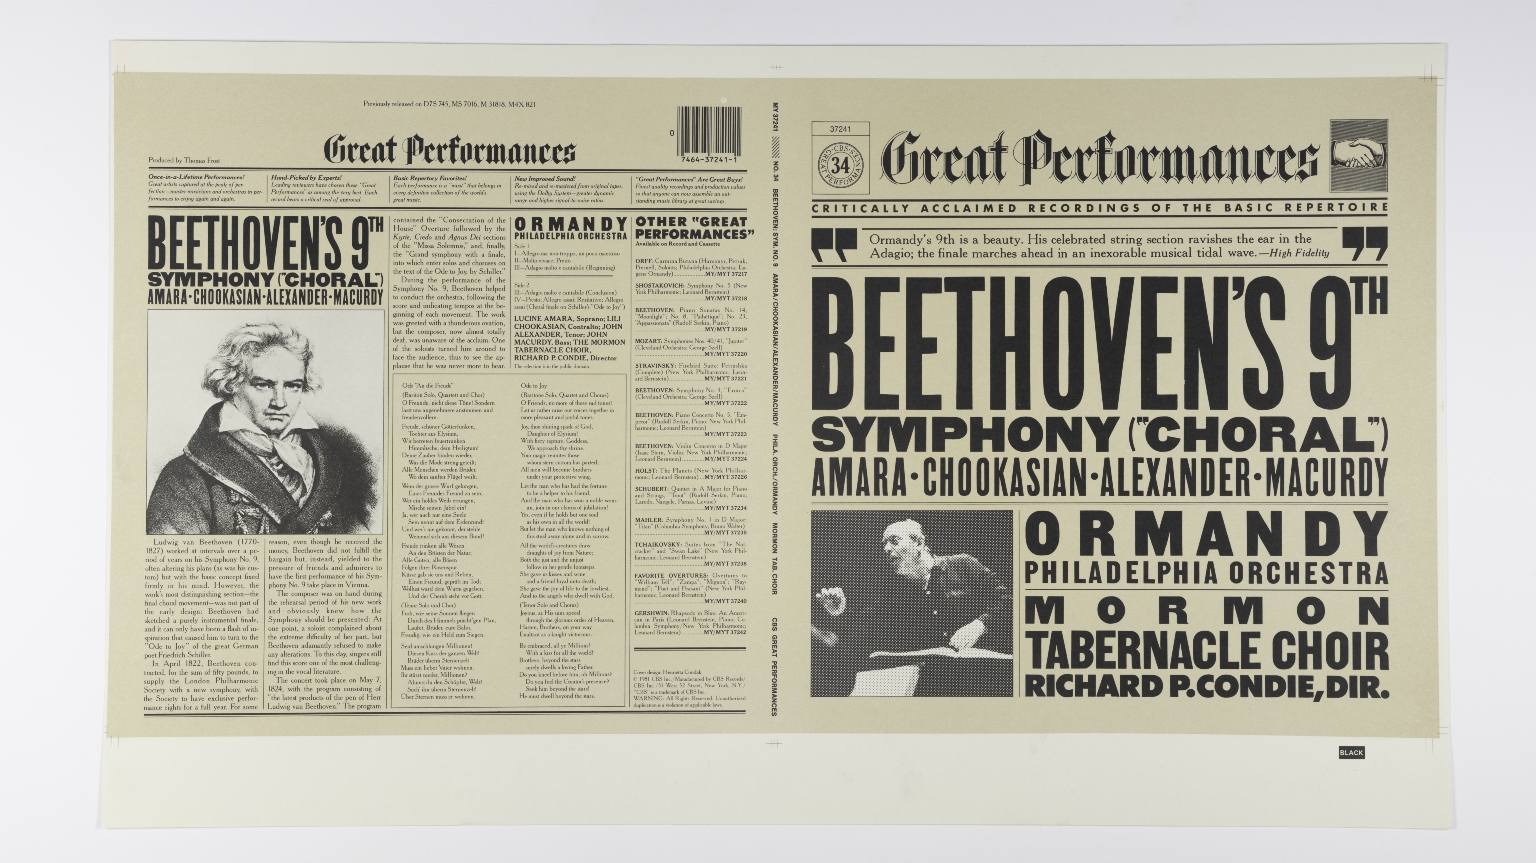 Beethoven's 9th Symphony ("Choral")